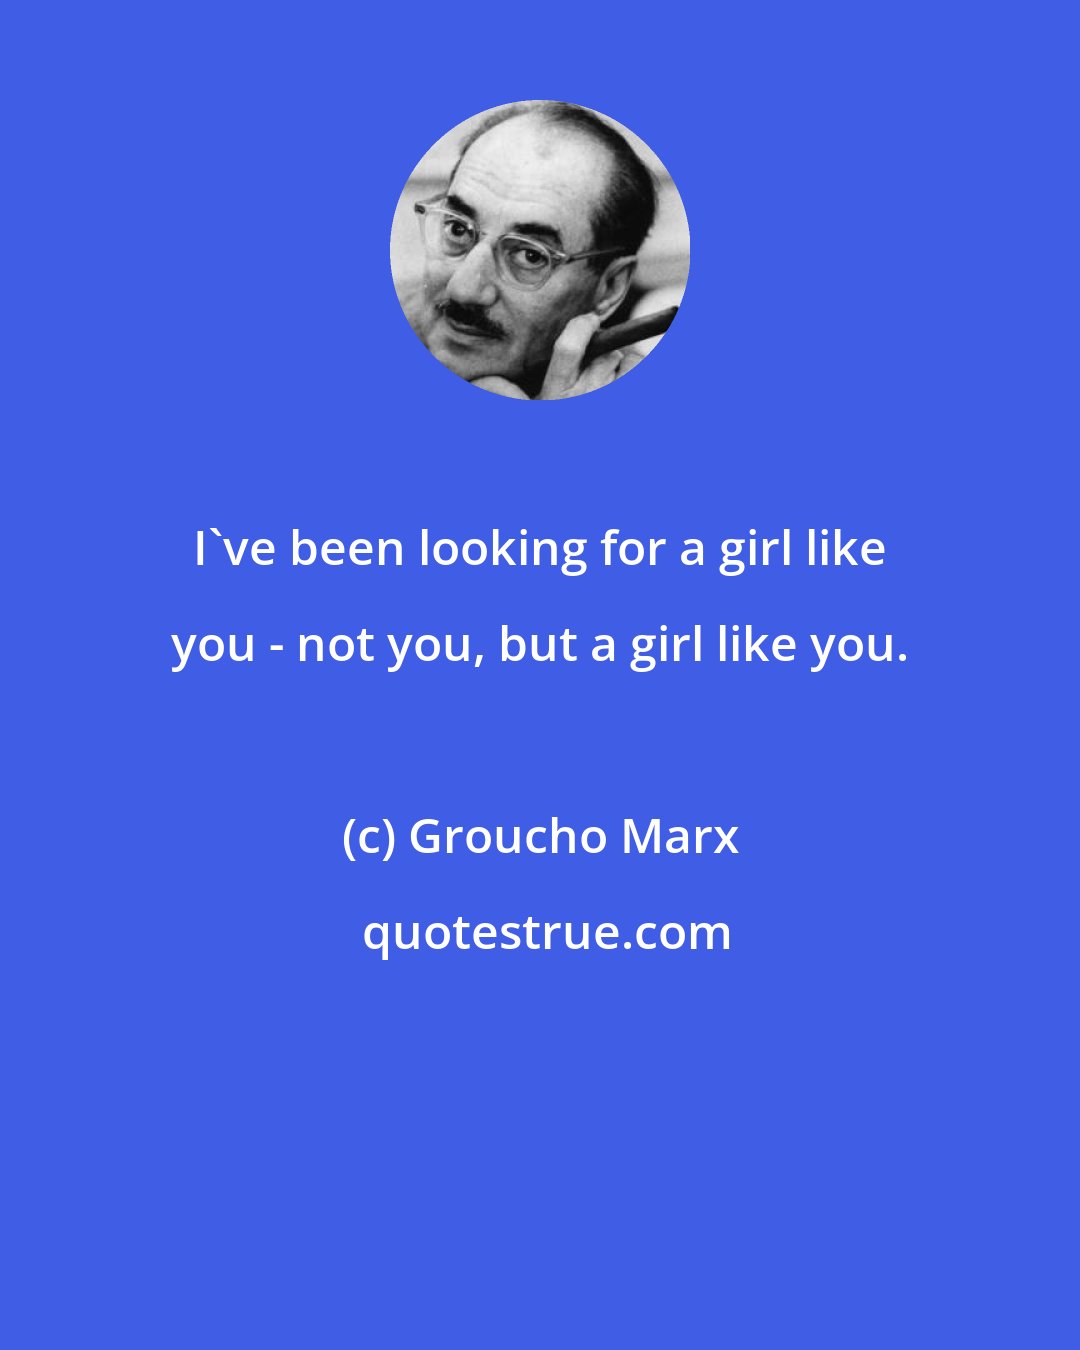 Groucho Marx: I've been looking for a girl like you - not you, but a girl like you.